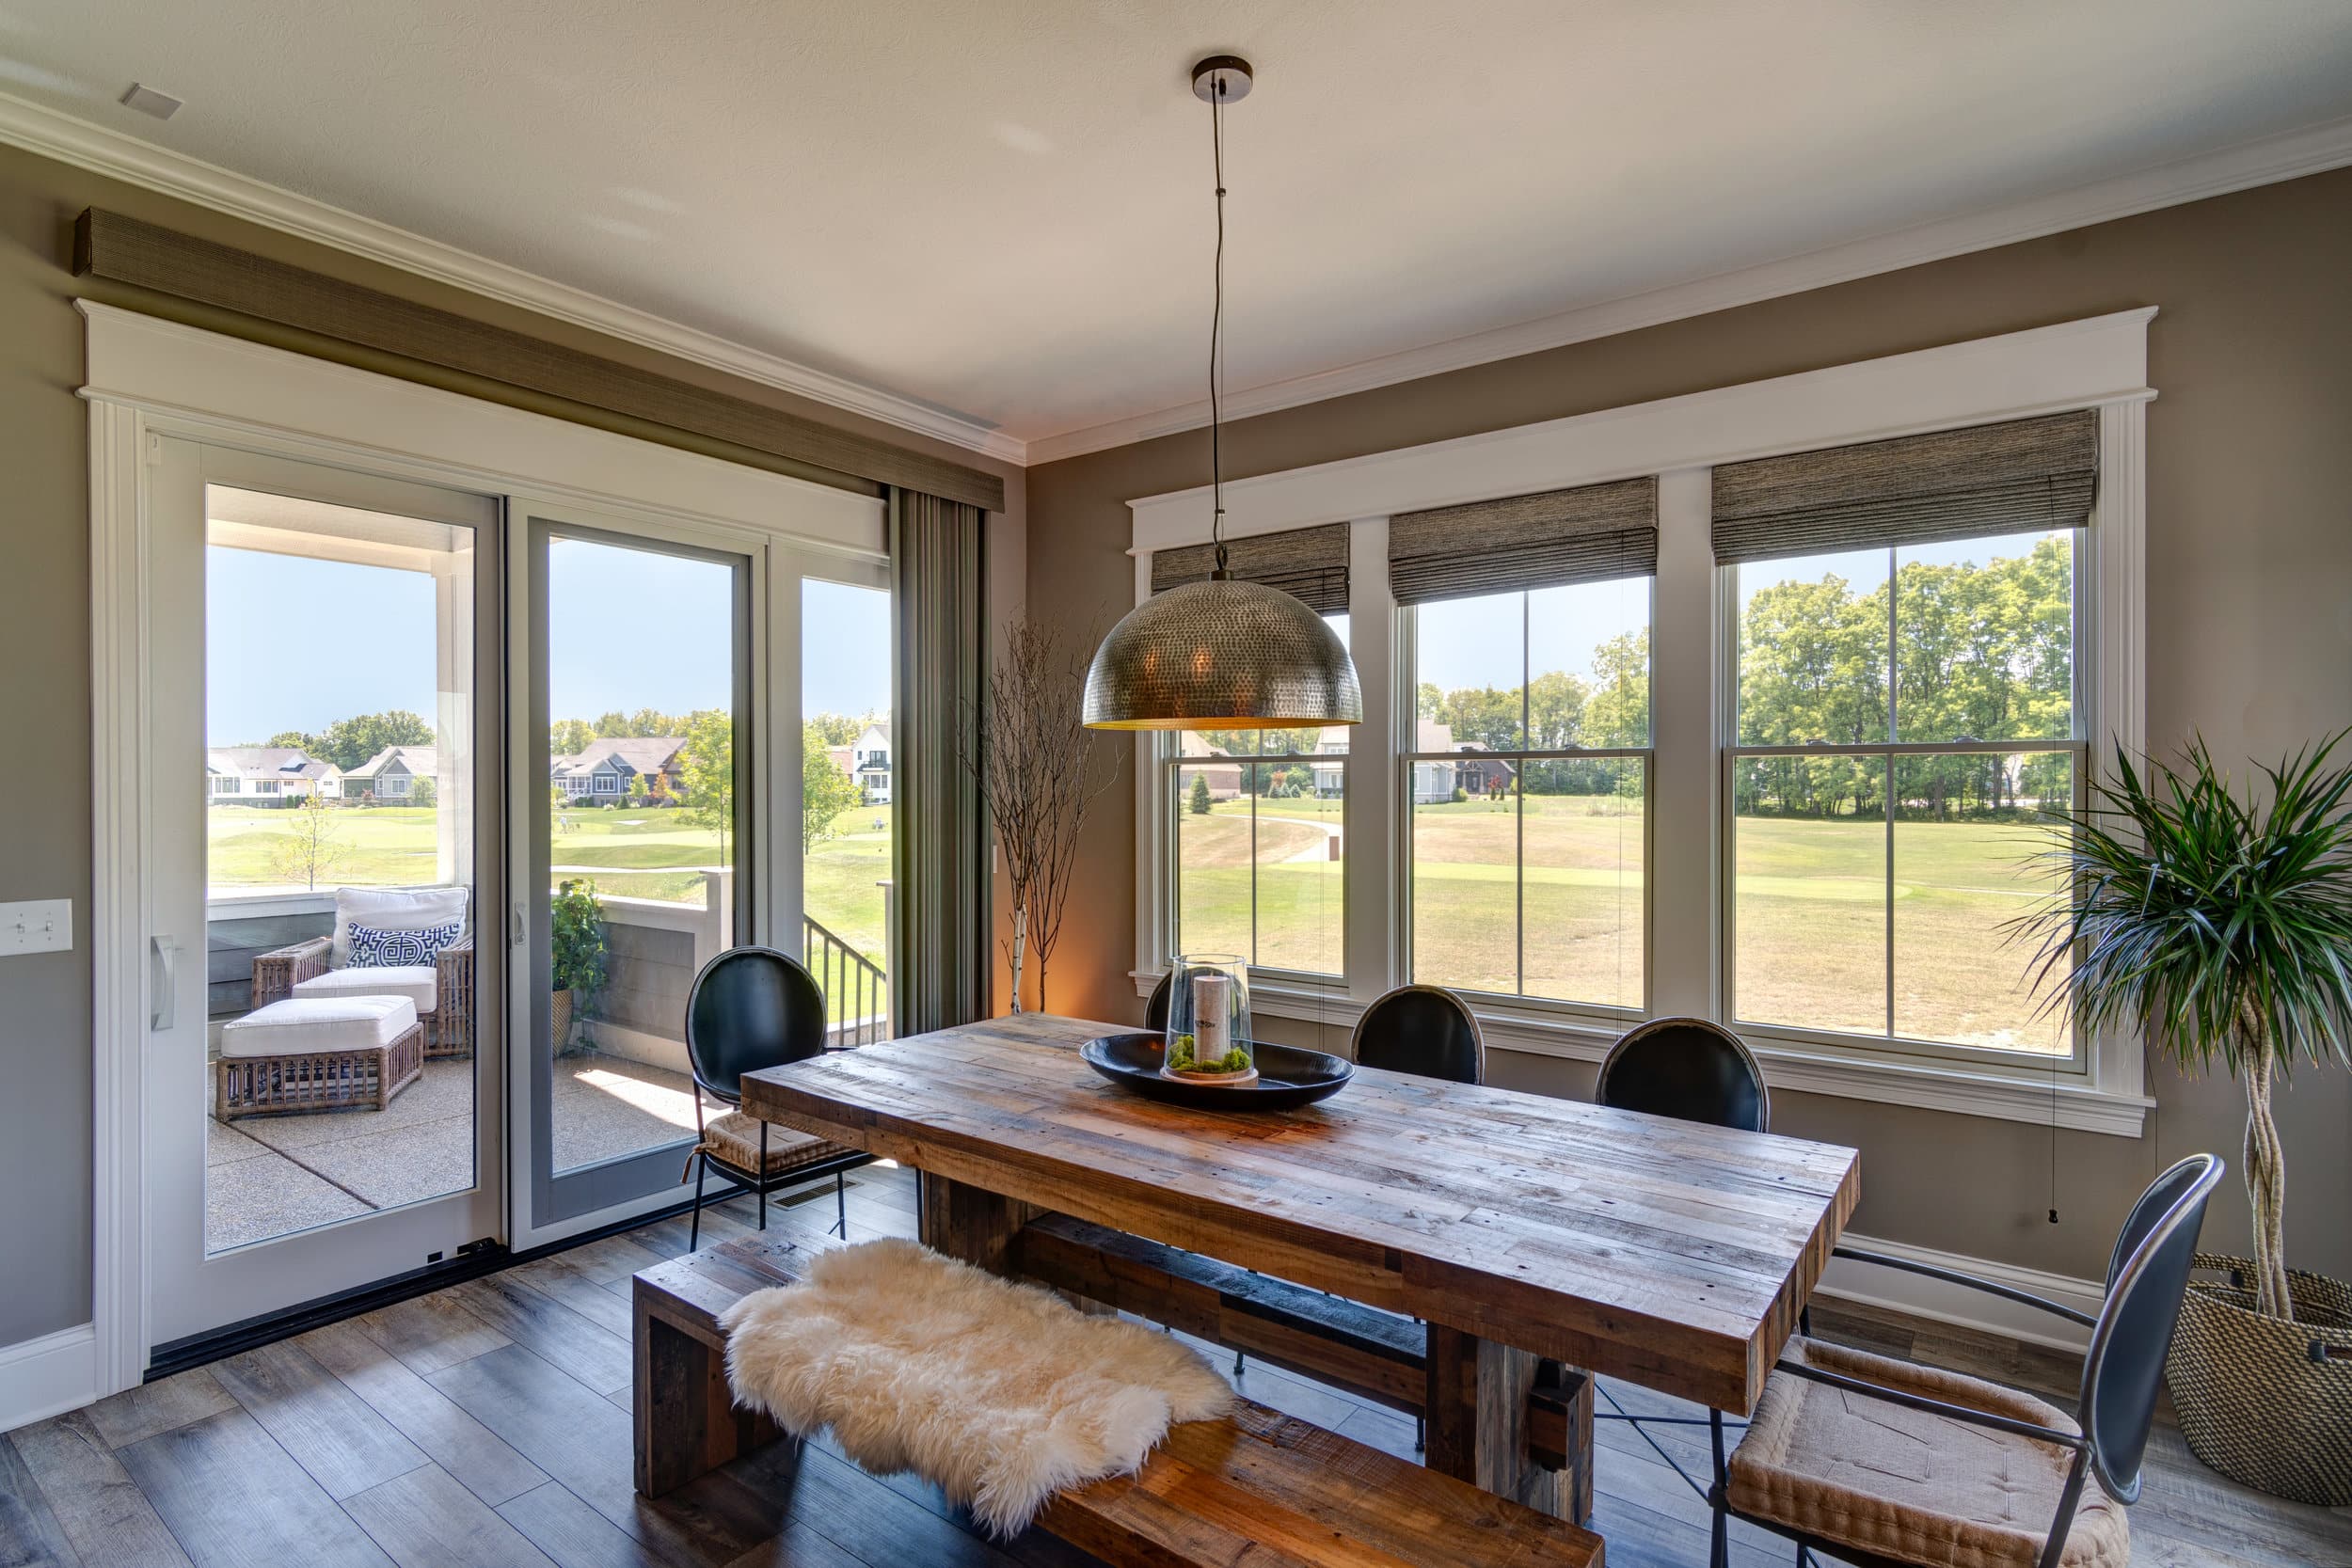 A dining room with hardwood floors and a sliding glass door in a custom home build by a Custom Home Builder Carmel Indiana.